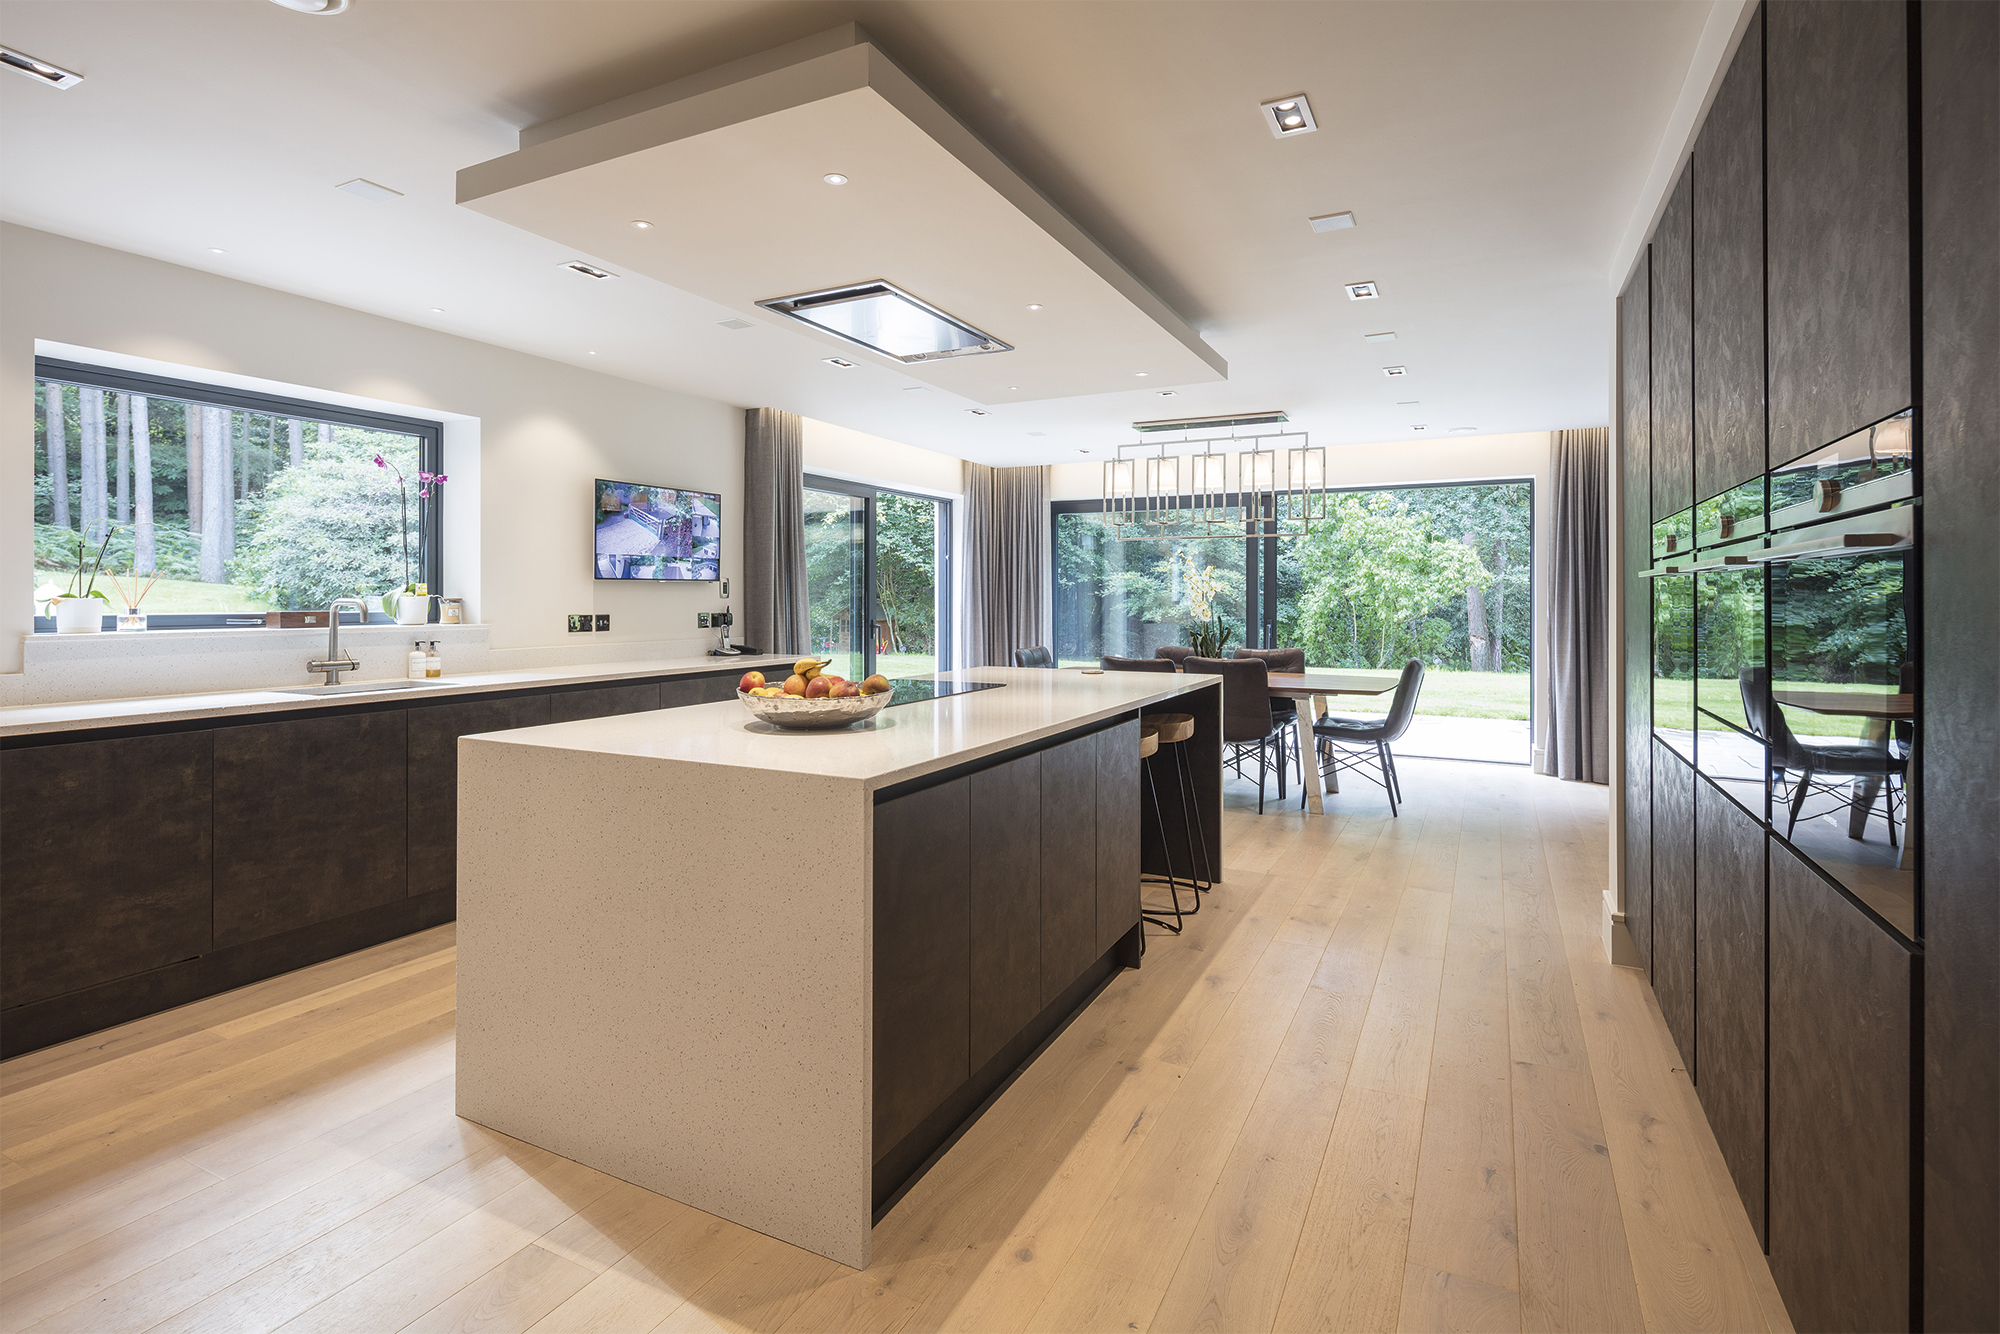 Kitchen in fully integrated smart home